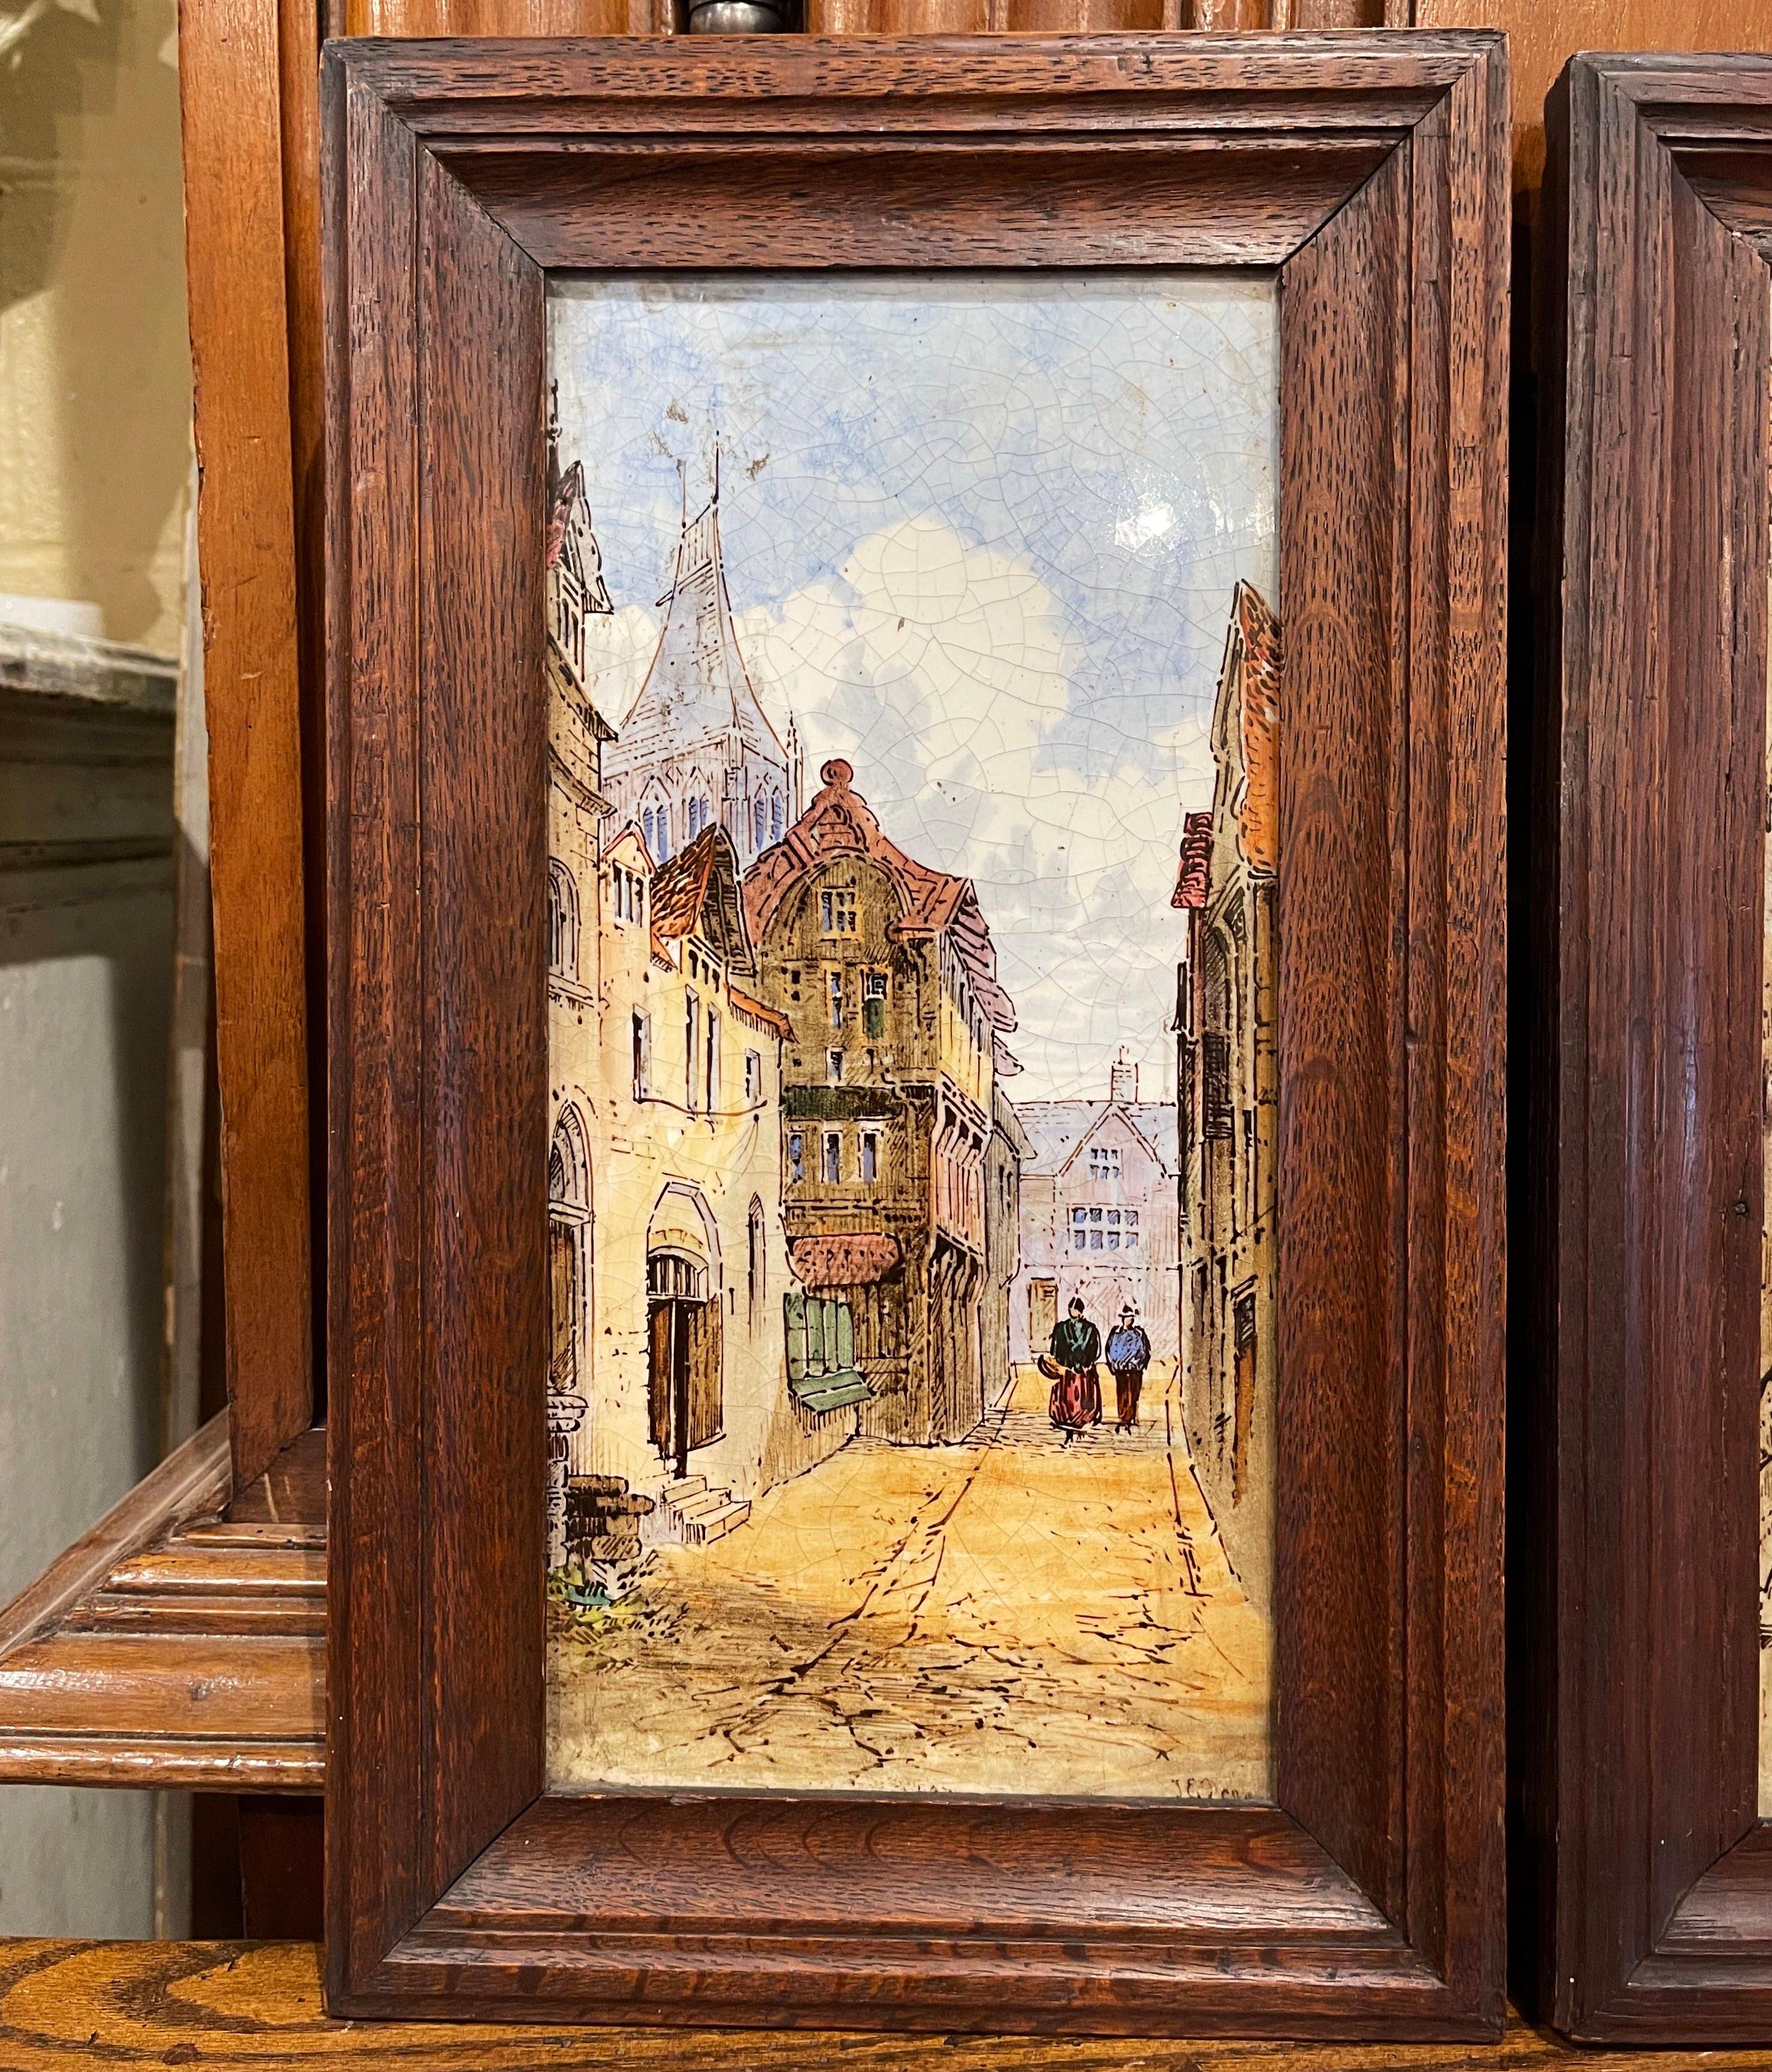 Crafted in England circa 1880, and set in the original carved oak frames, each plaque is hand painted and stamped on the back Minton, London, England. Each porcelain, signed by the artist J.E. Dean, depicts a British street scene with people